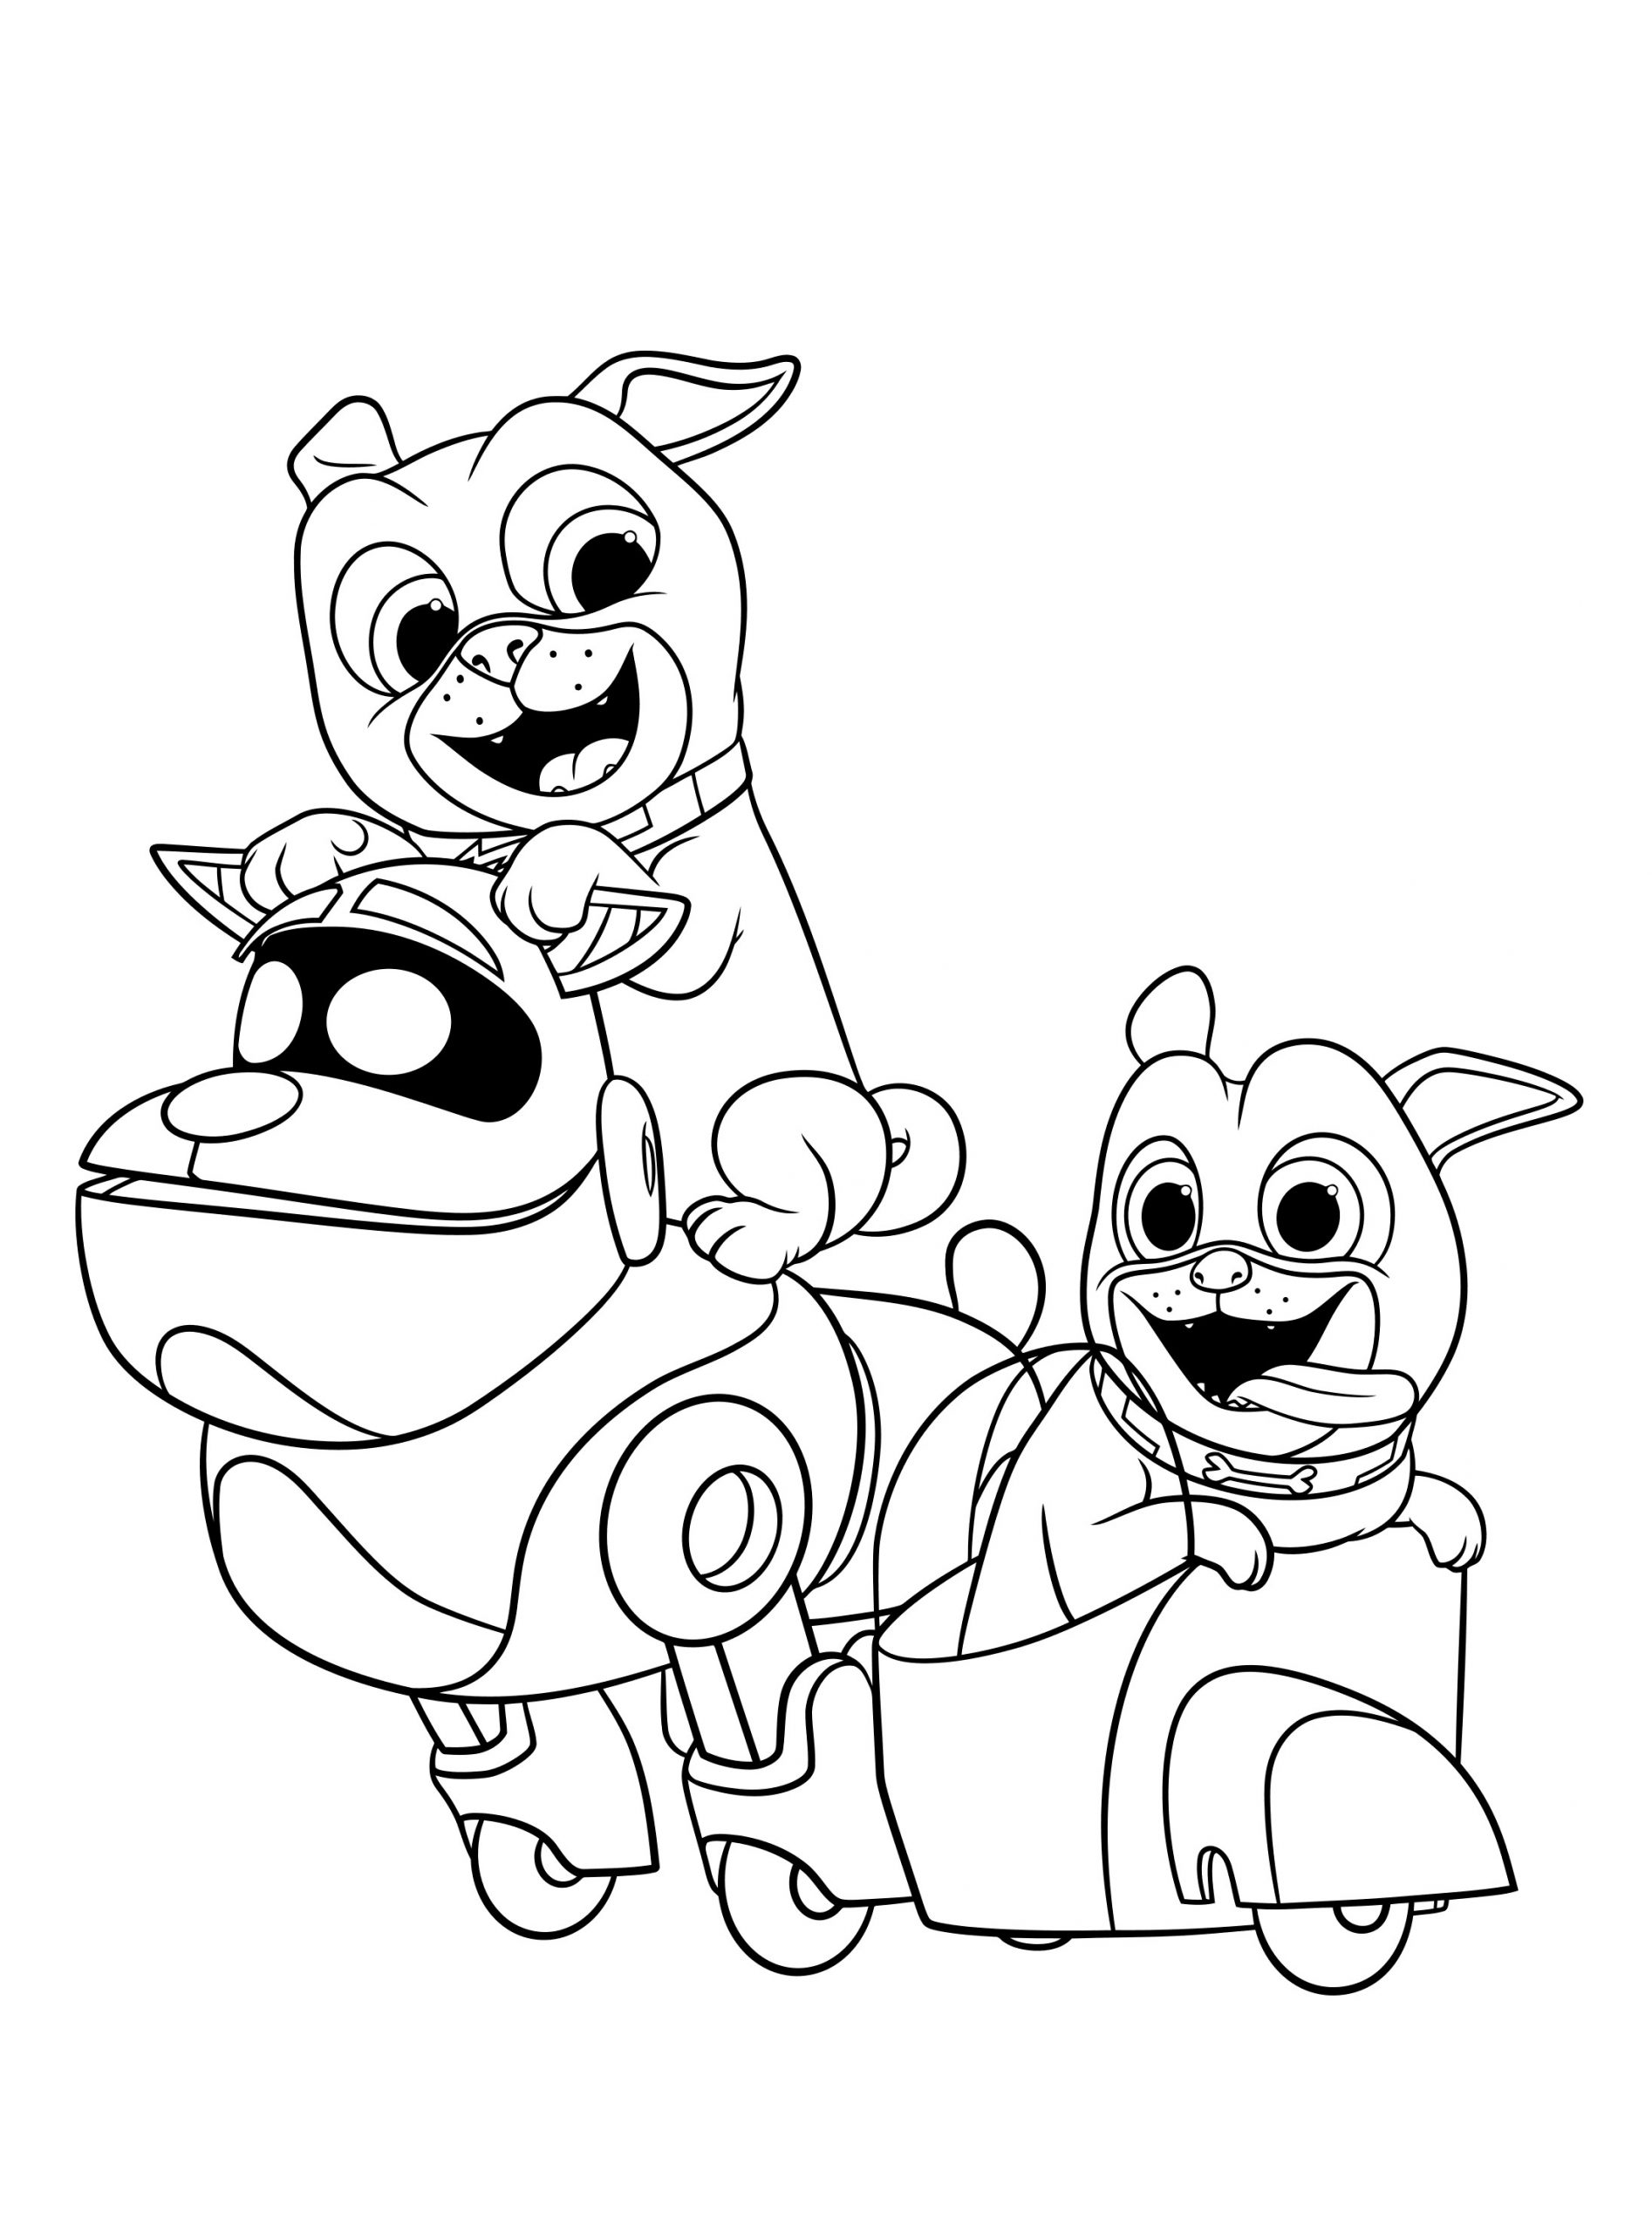 Rollie and bingo coloring page